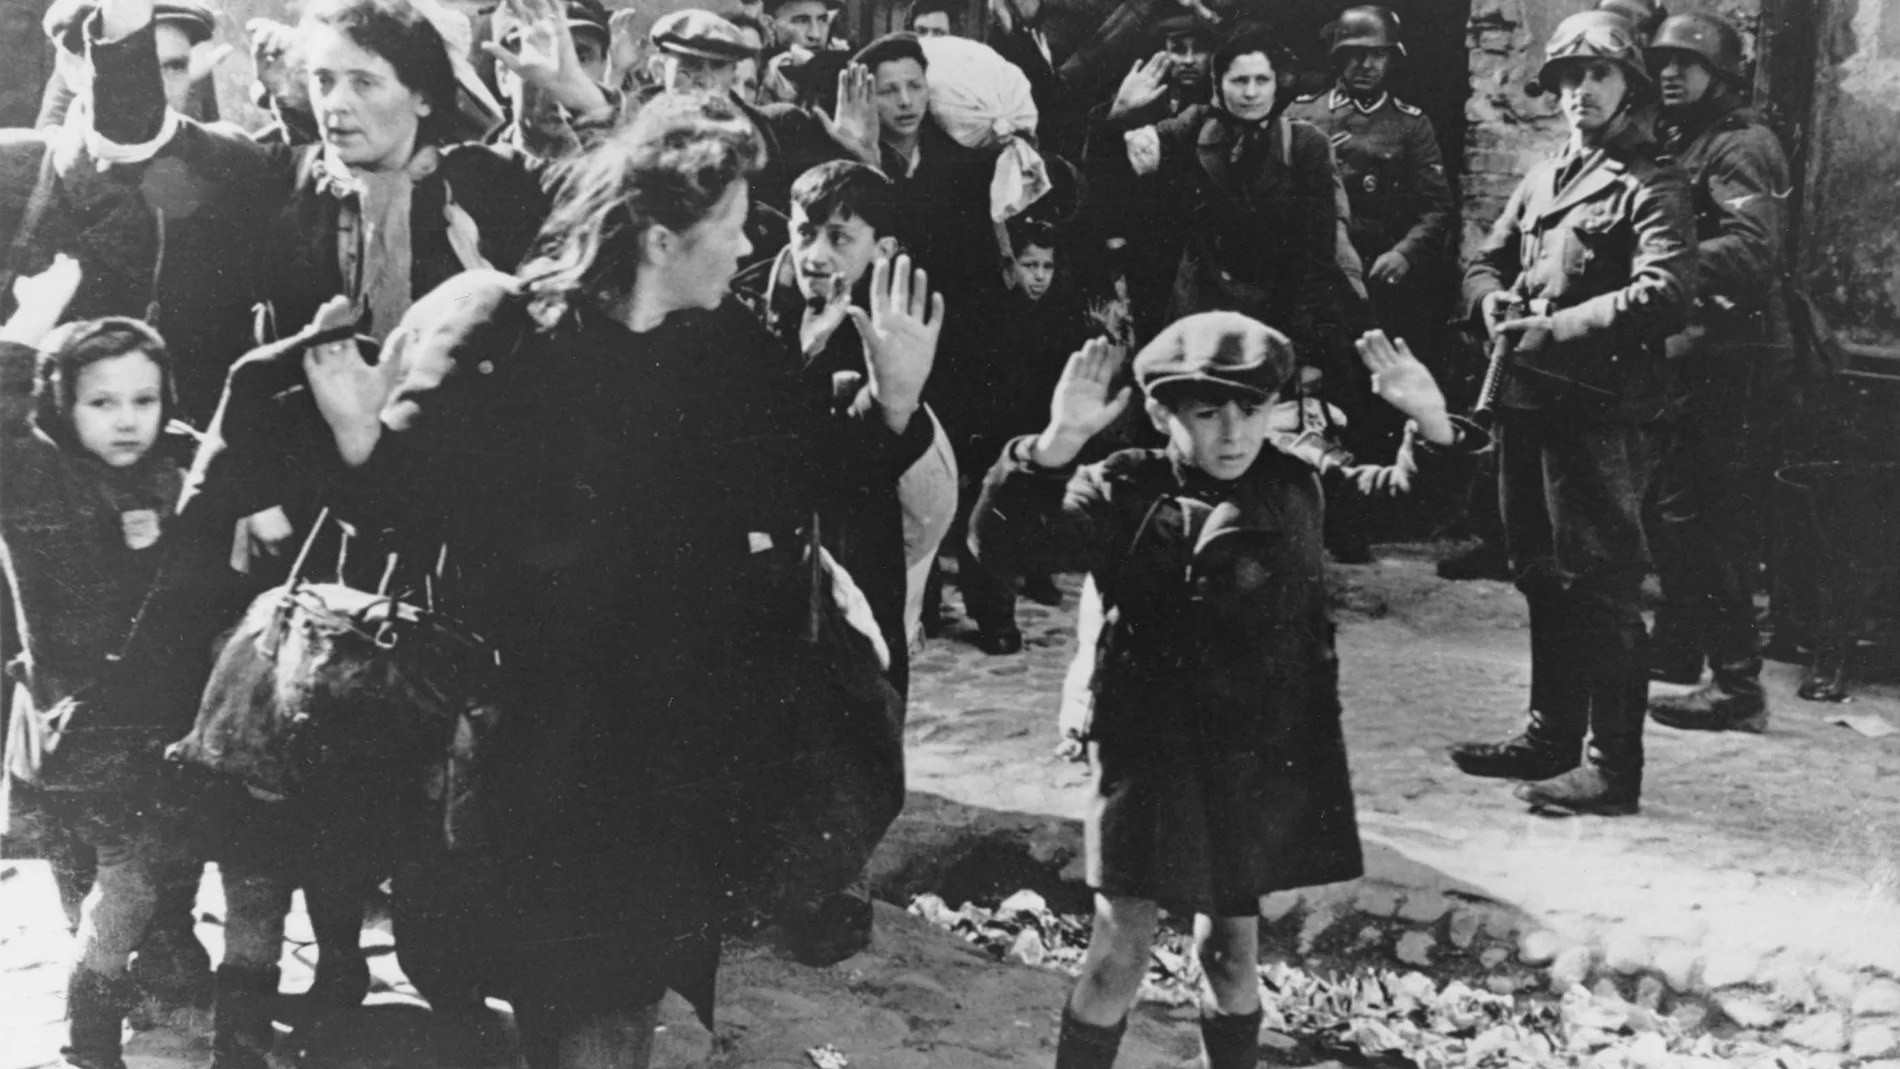 FILE-This Feb. 17, 1941 file photo shows a scene in the Warsaw Ghetto where Jews wearing white armlets bearing the Star of David board a tram marked with the words For Jews Only. After a year of tough negotiations, Germany agreed Monday, Dec. 5, 2011, to pay pensions to about 16,000 Holocaust victims worldwide who survived wartime ghettos or were forced to hide from Nazi persecution. (AP Photo, File)